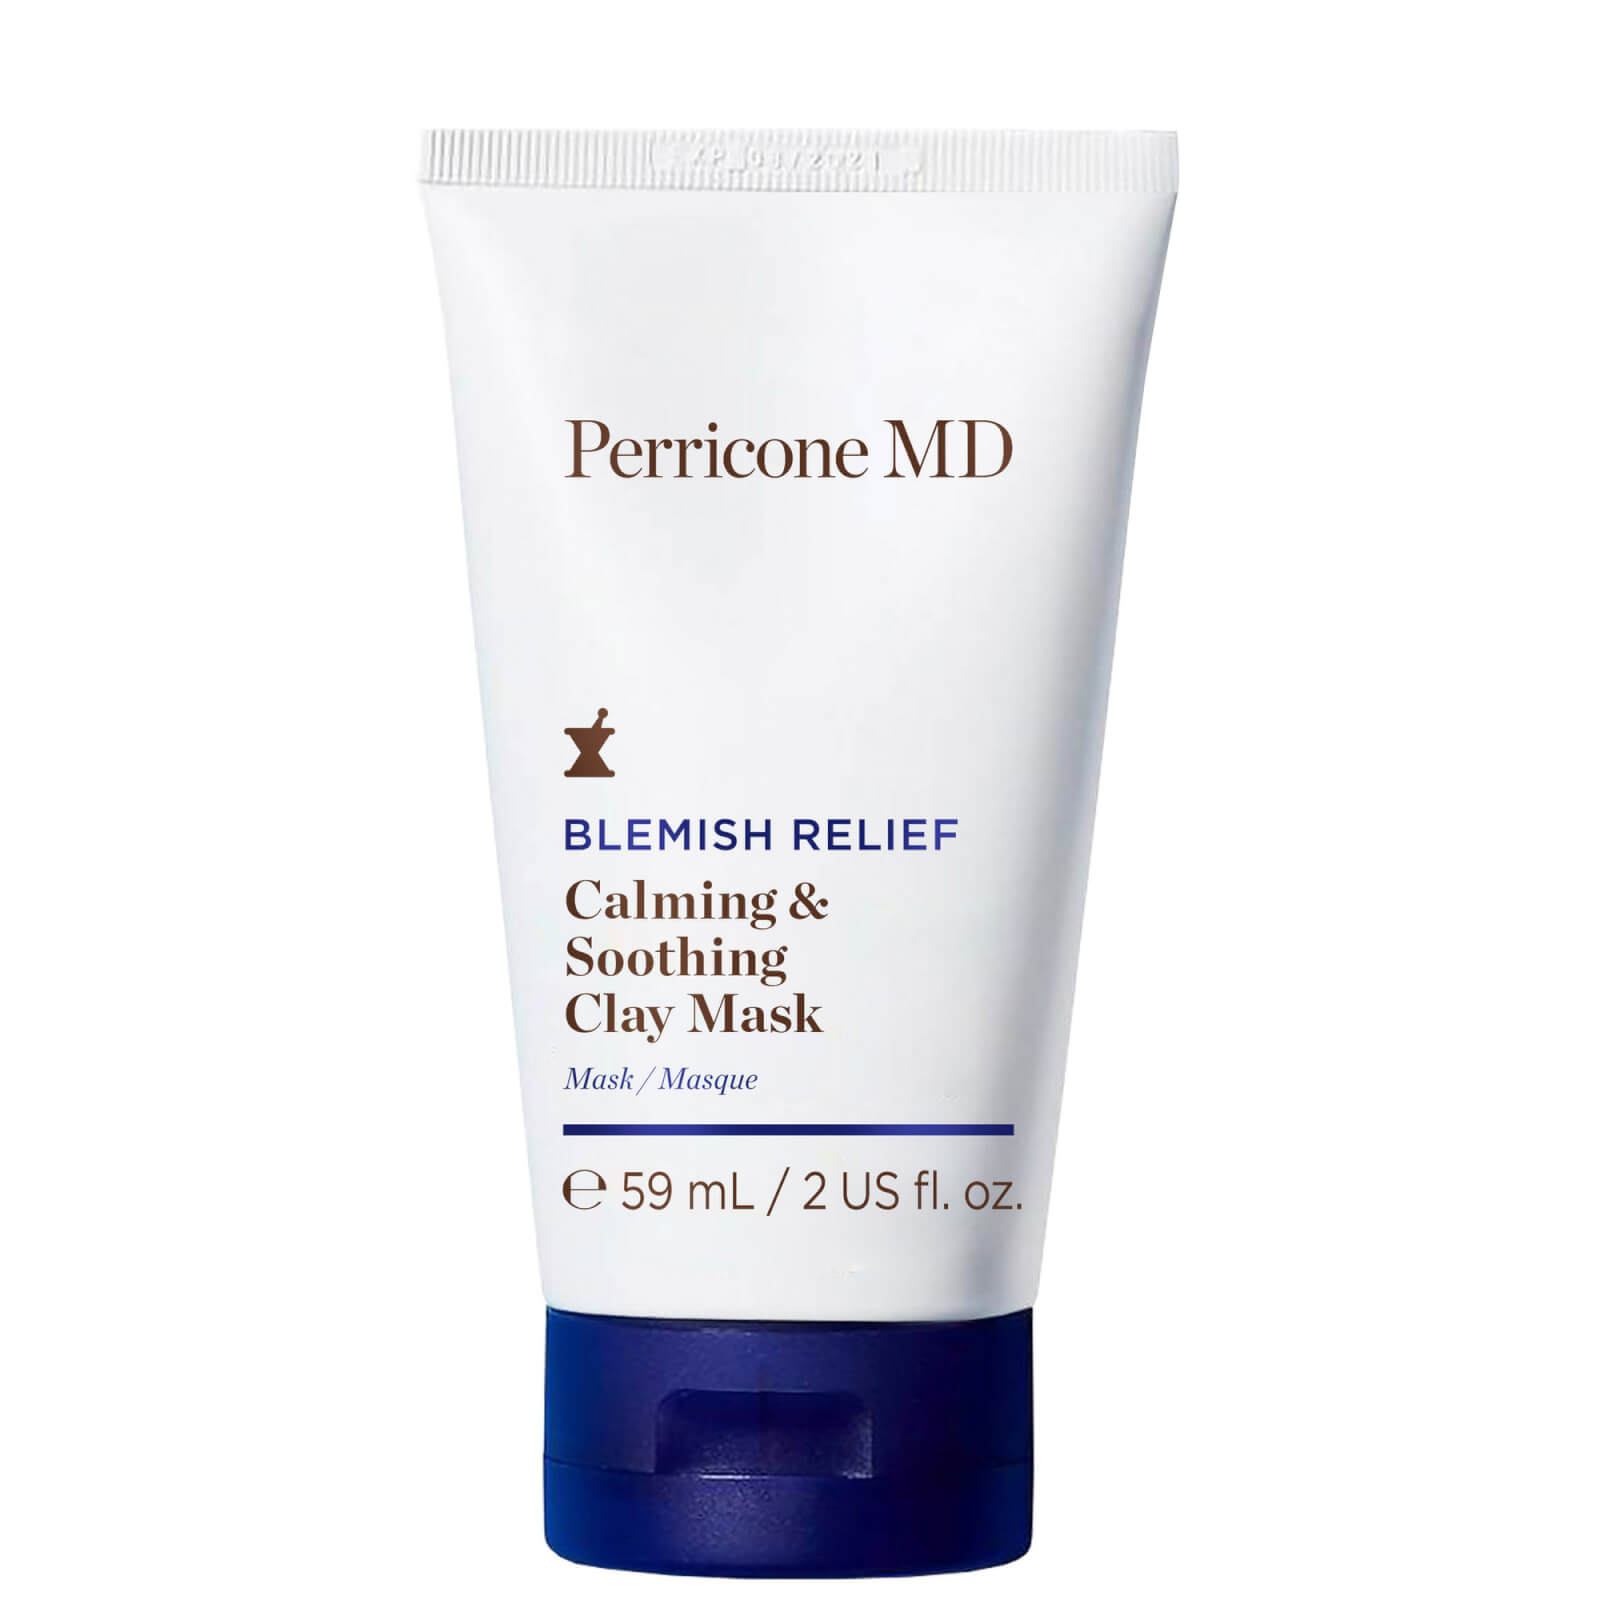 Photos - Facial Mask Perricone MD Blemish Relief Calming and Soothing Clay Mask Tube 59ml 